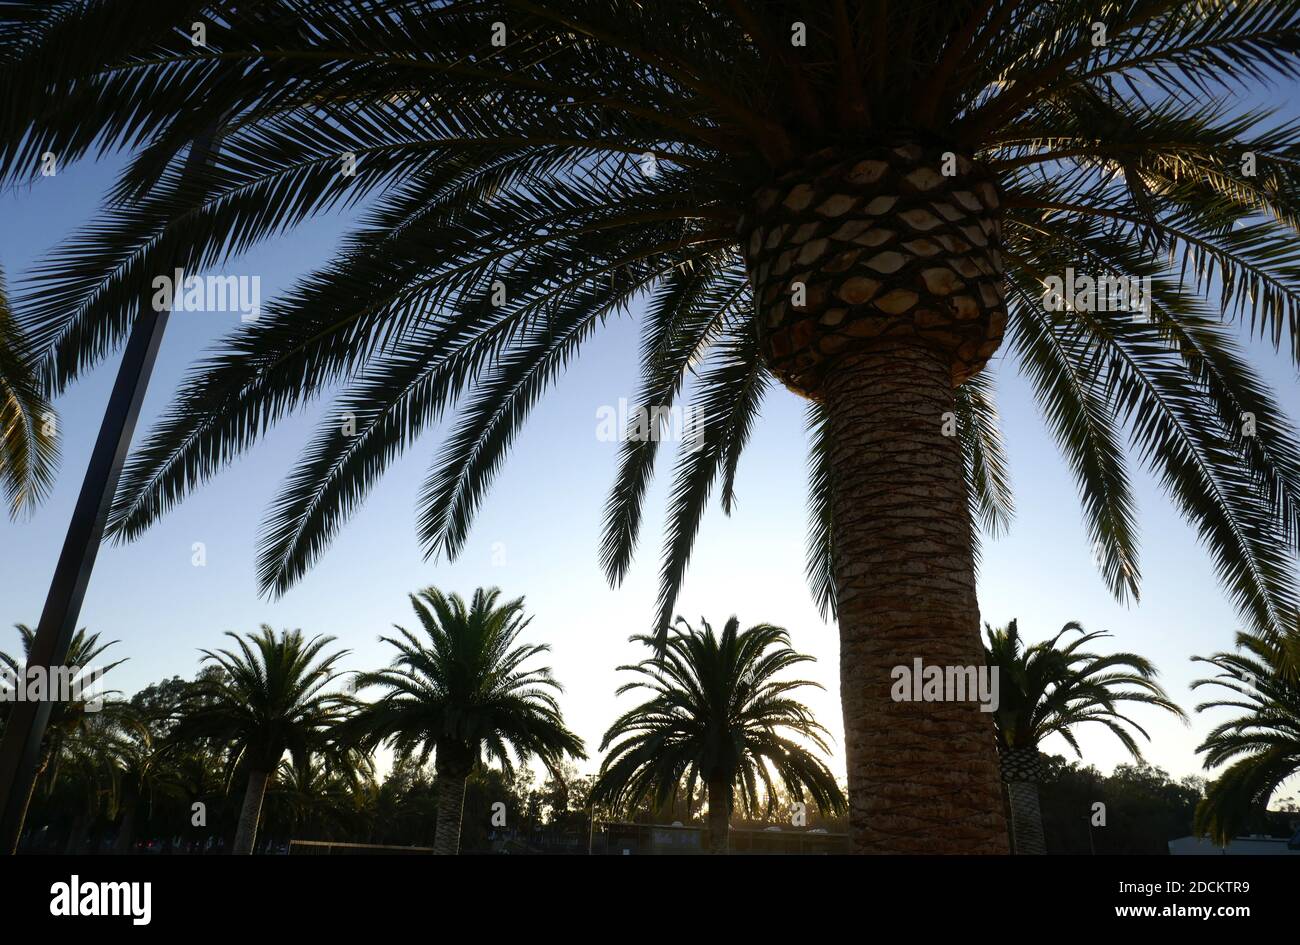 Los Angeles, California, USA 16th November 2020 A general view of atmosphere of palm trees at Los Angeles National Cemetery on November 16, 2020 in Los Angeles, California, USA. Photo by Barry King/Alamy Stock Photo Stock Photo